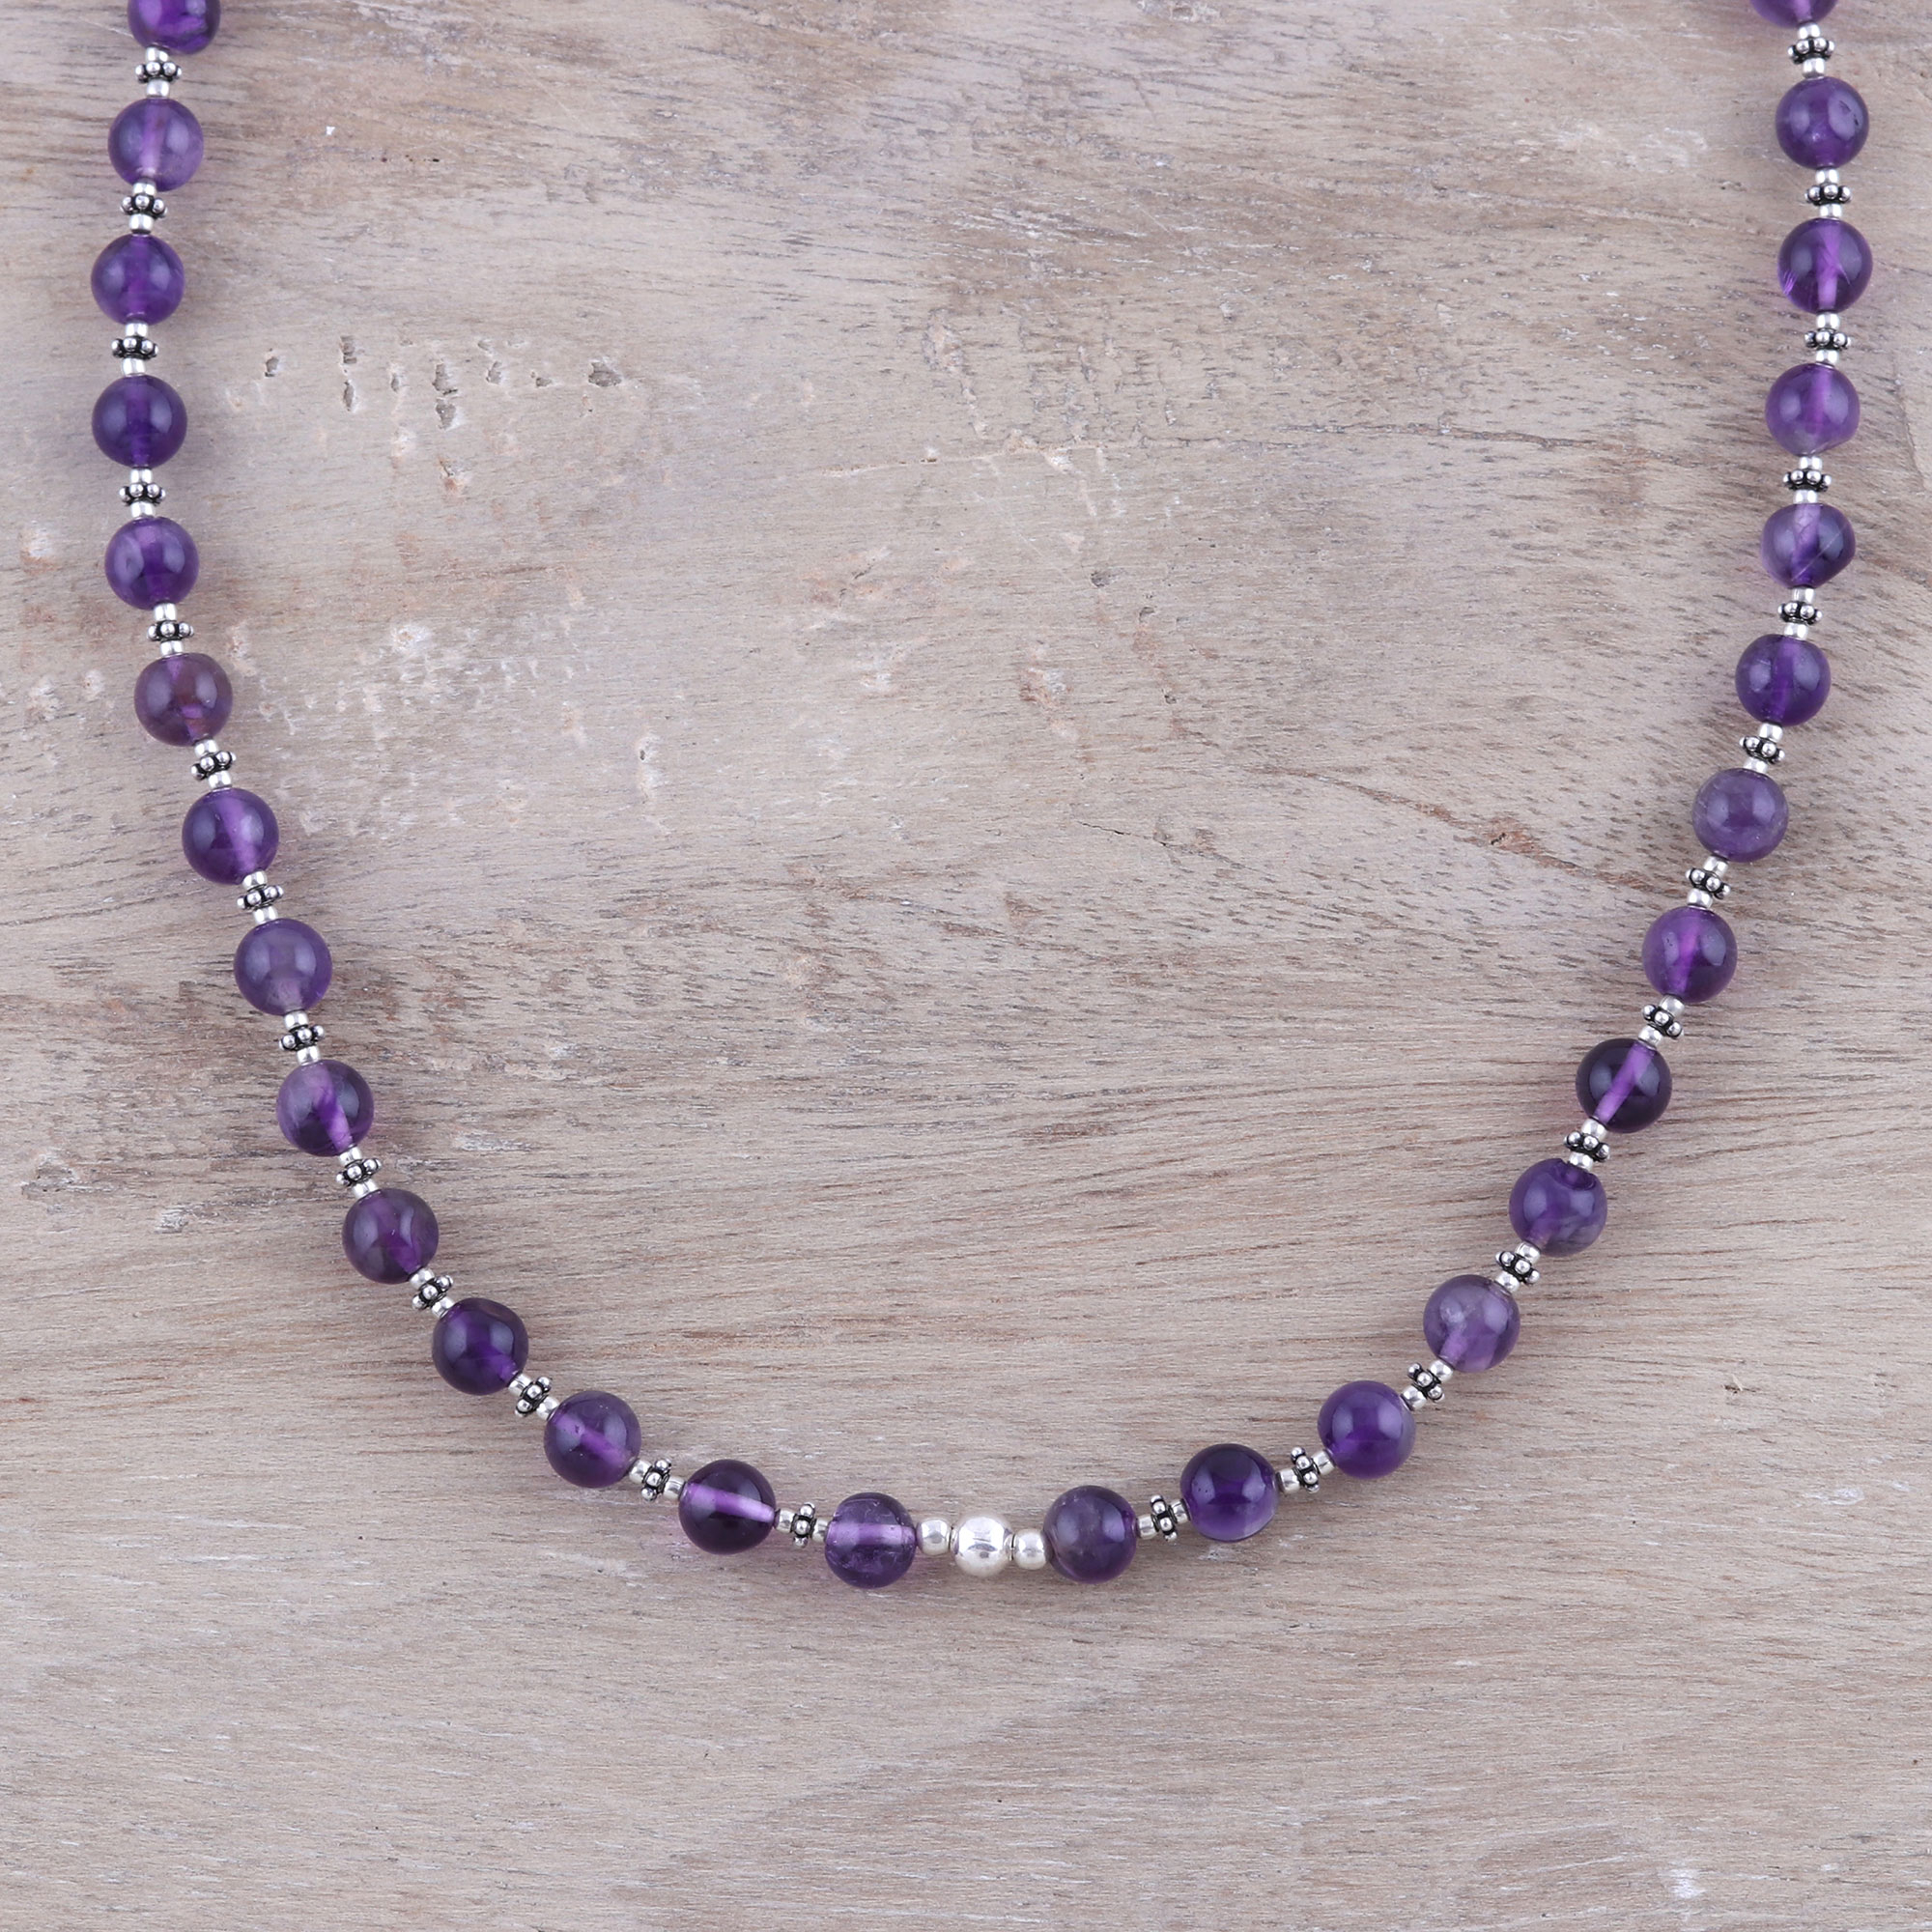 Amethyst Necklace Gemstone Jewelry Women Round Beaded with Silver Lobster Clasp 